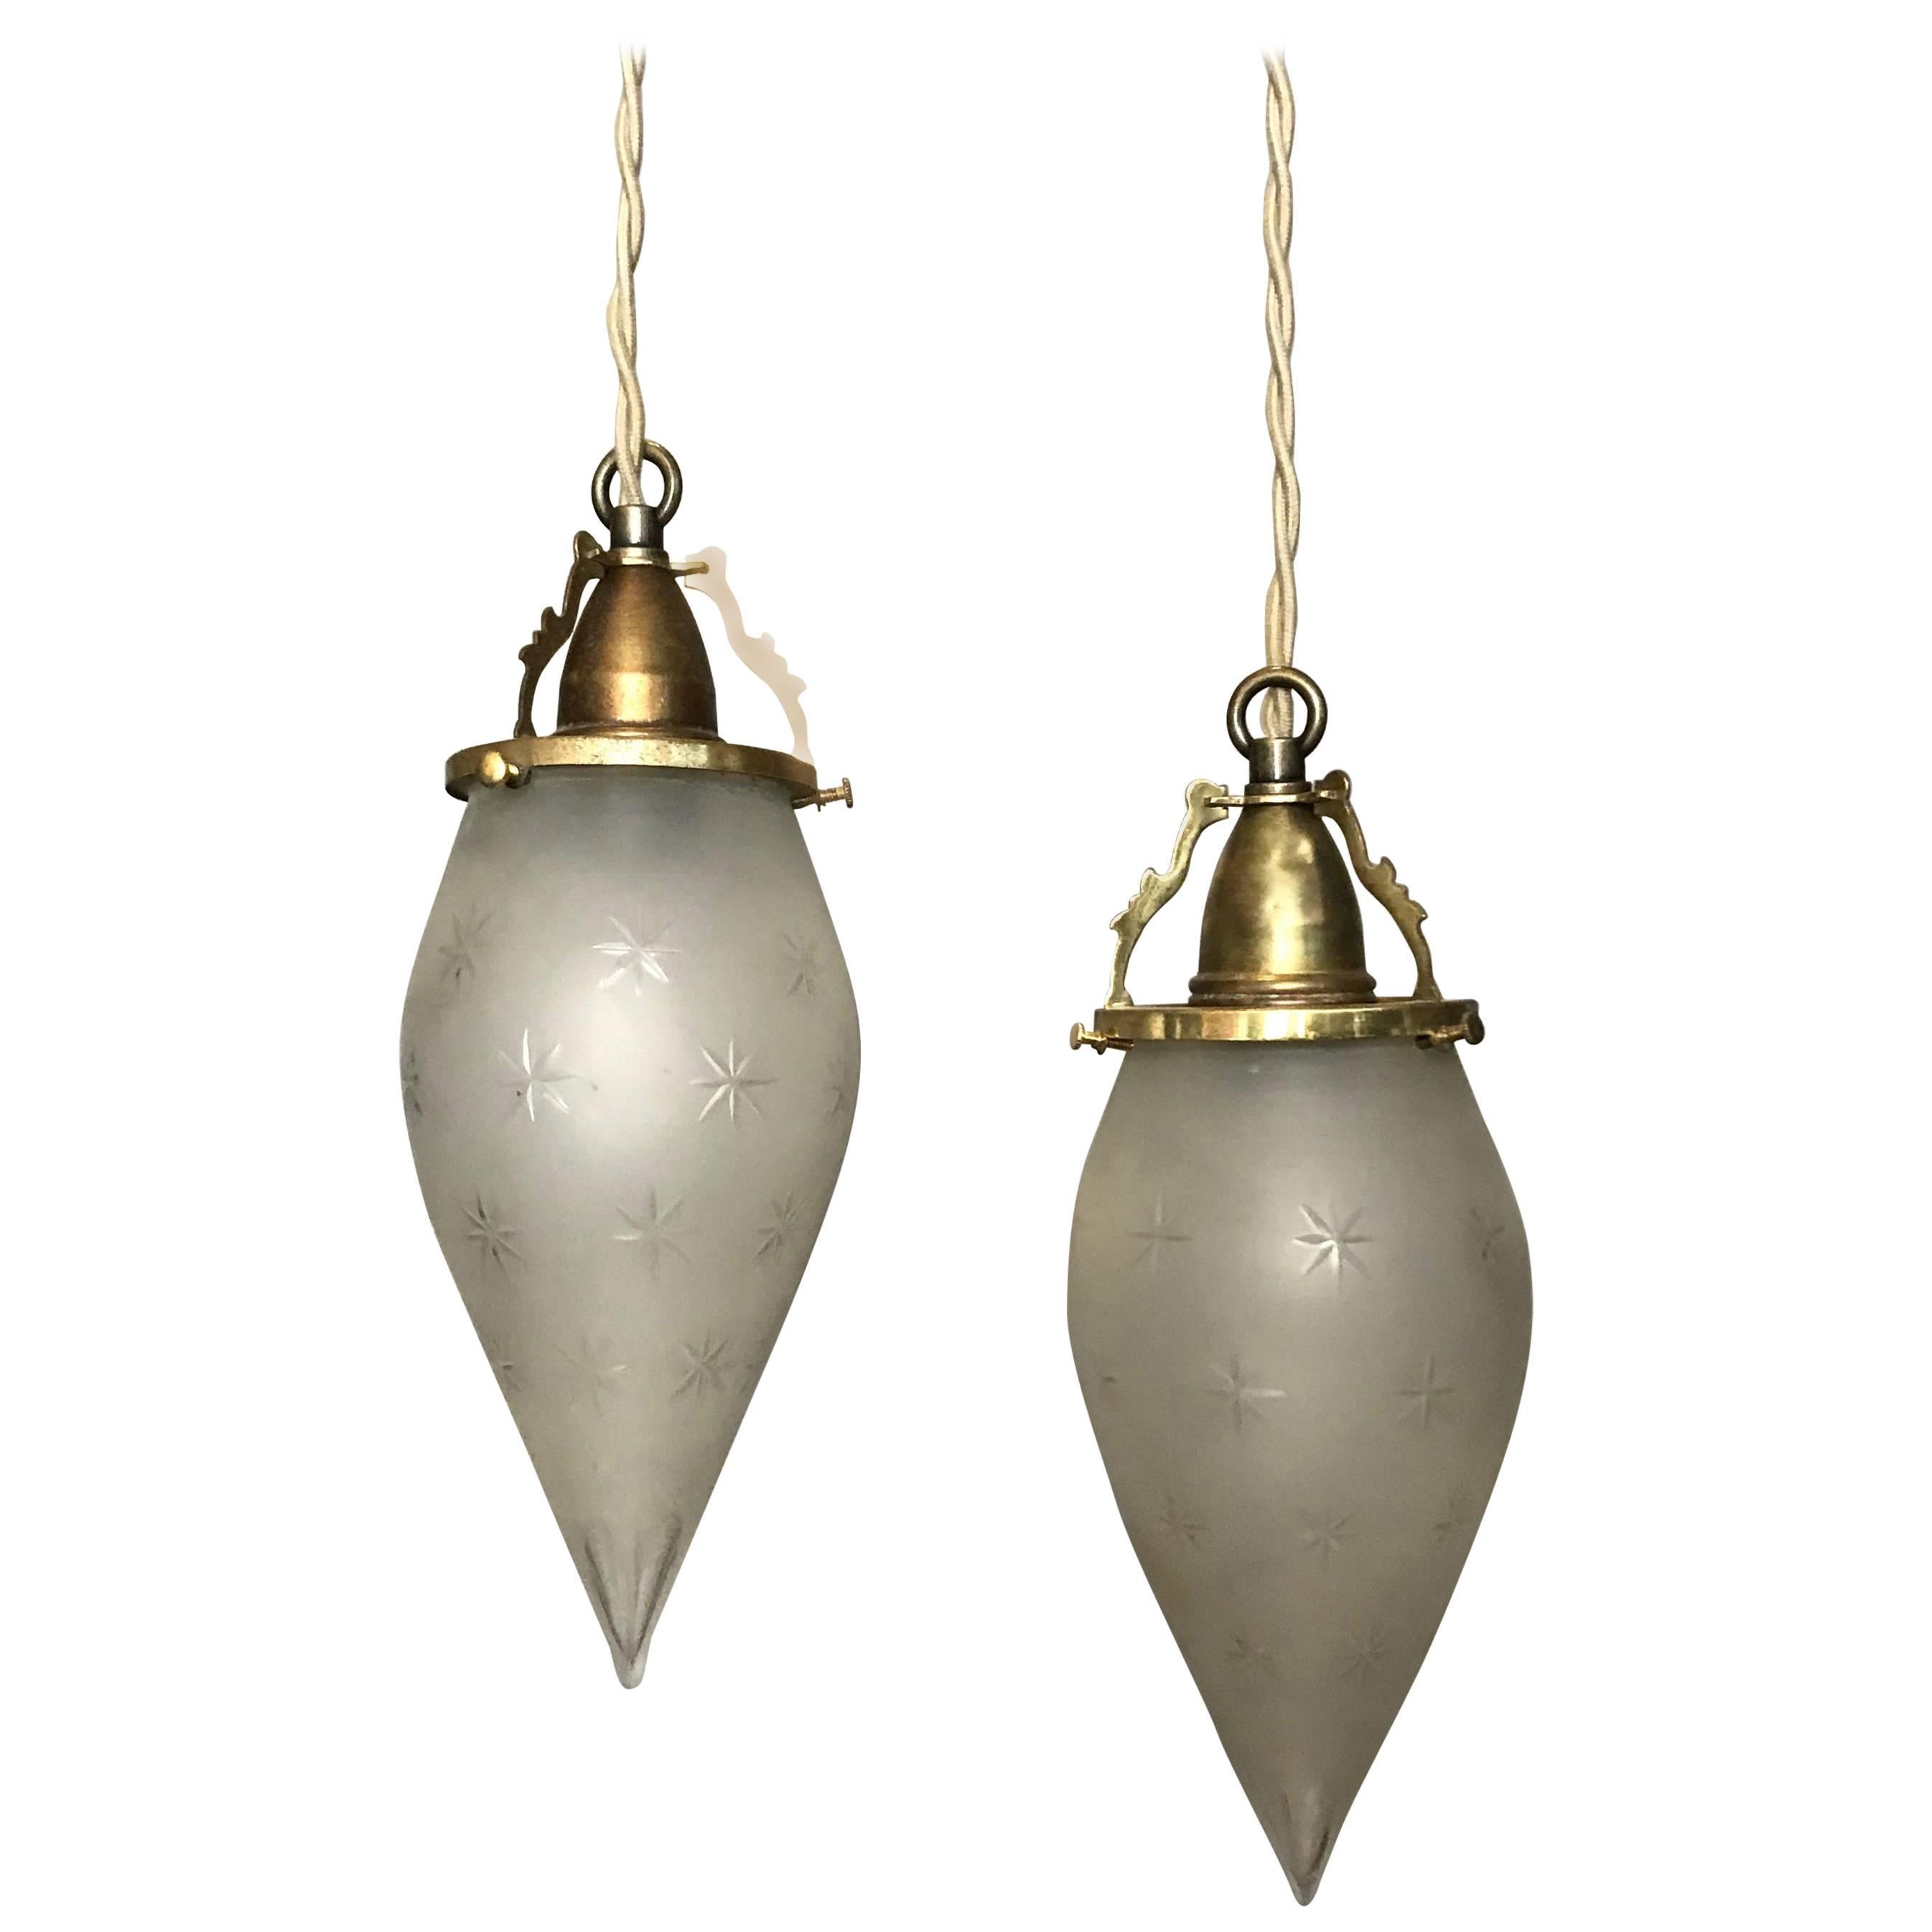 Pair of Etched Frosted Glass Teardrop Pendant Lights